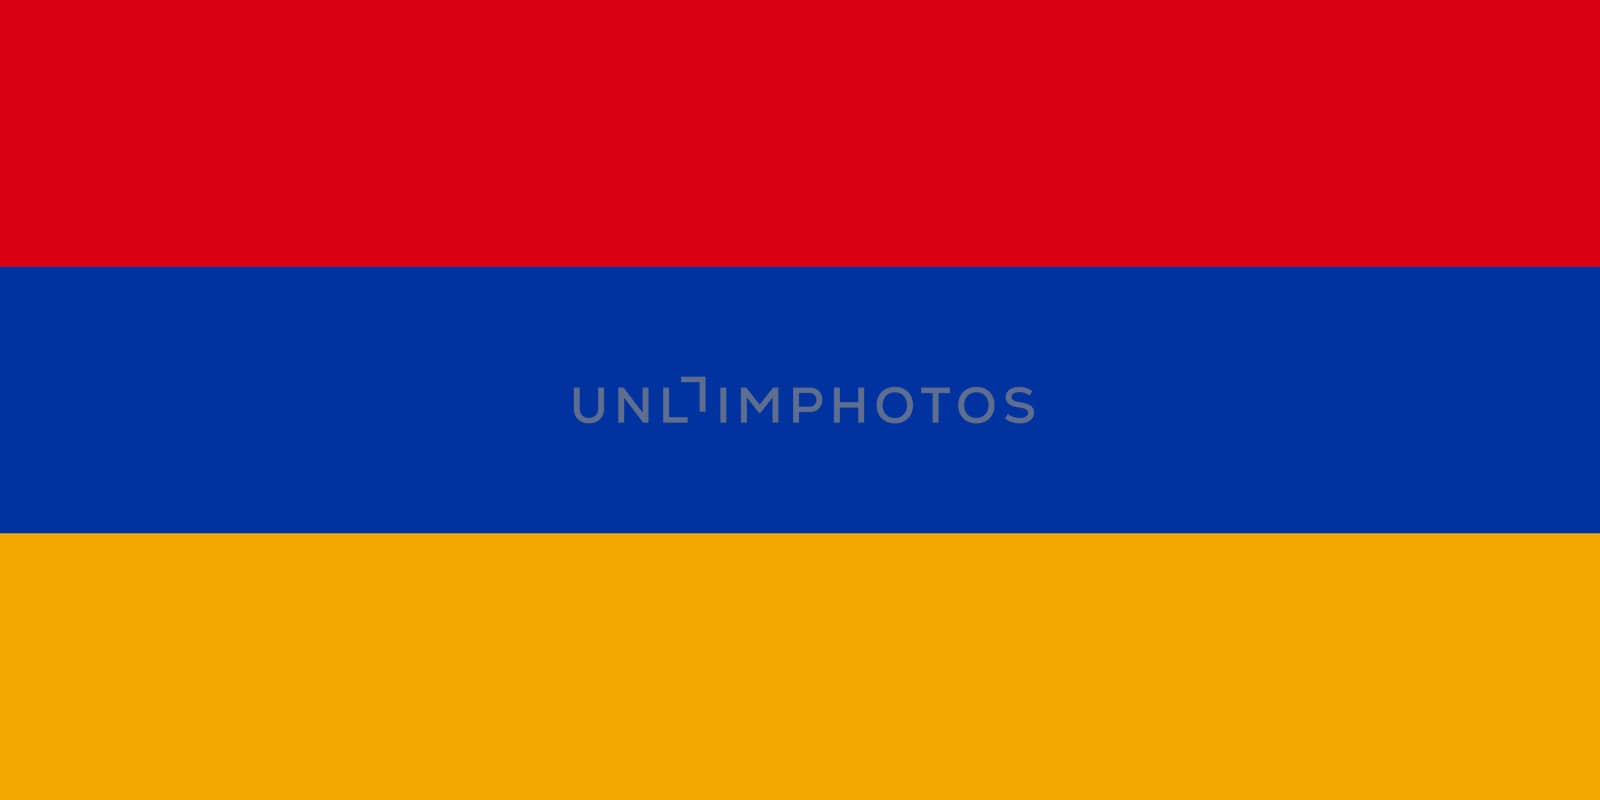 The flag of Armenia in red blue and yellow